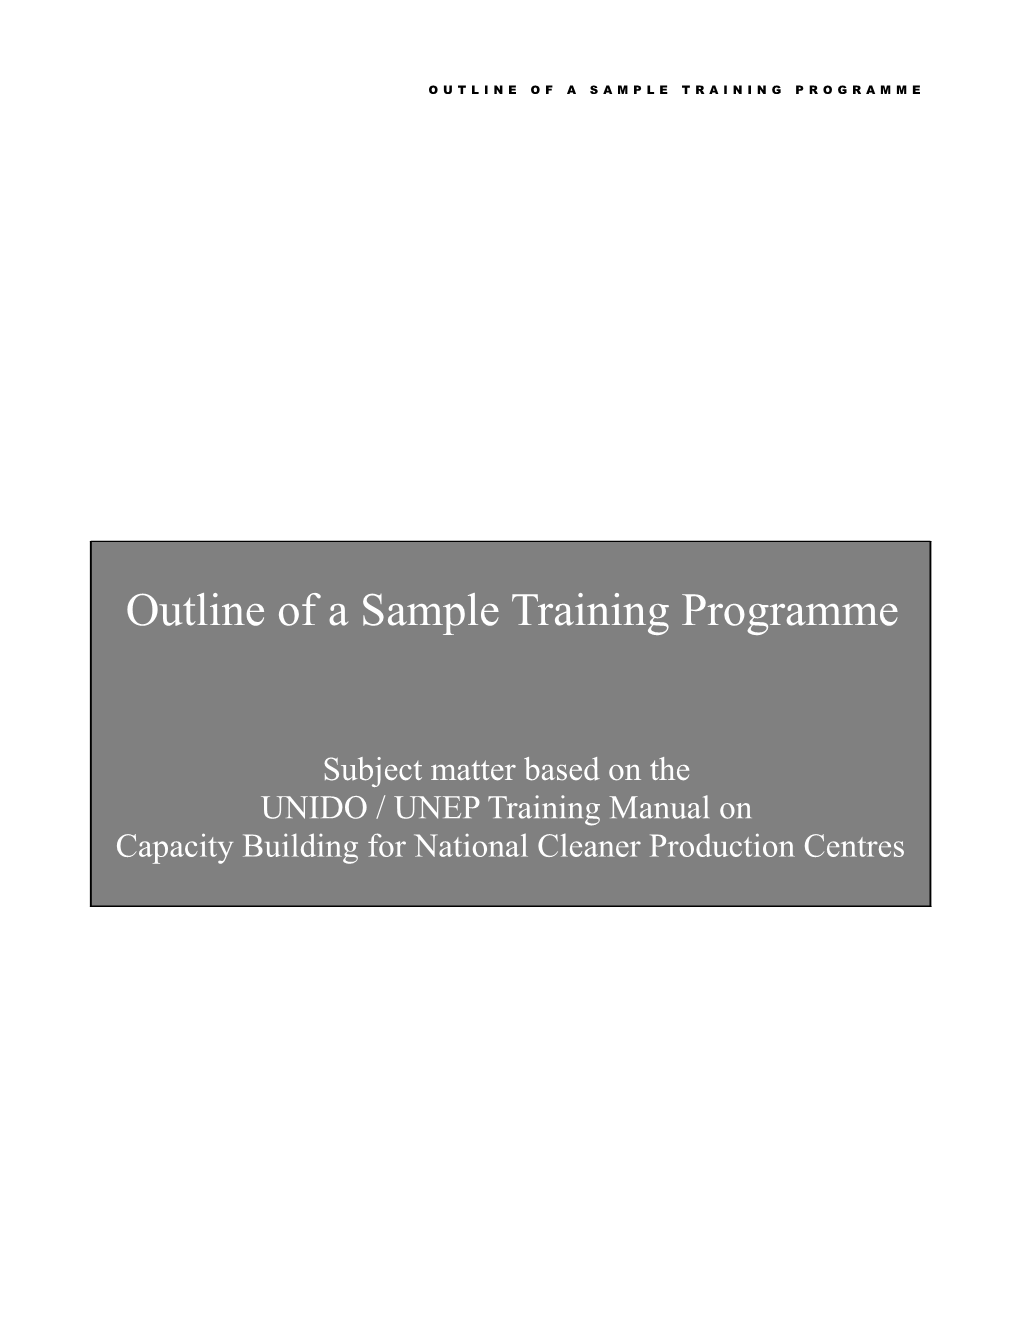 Outline of the Training Workshop at Berlin